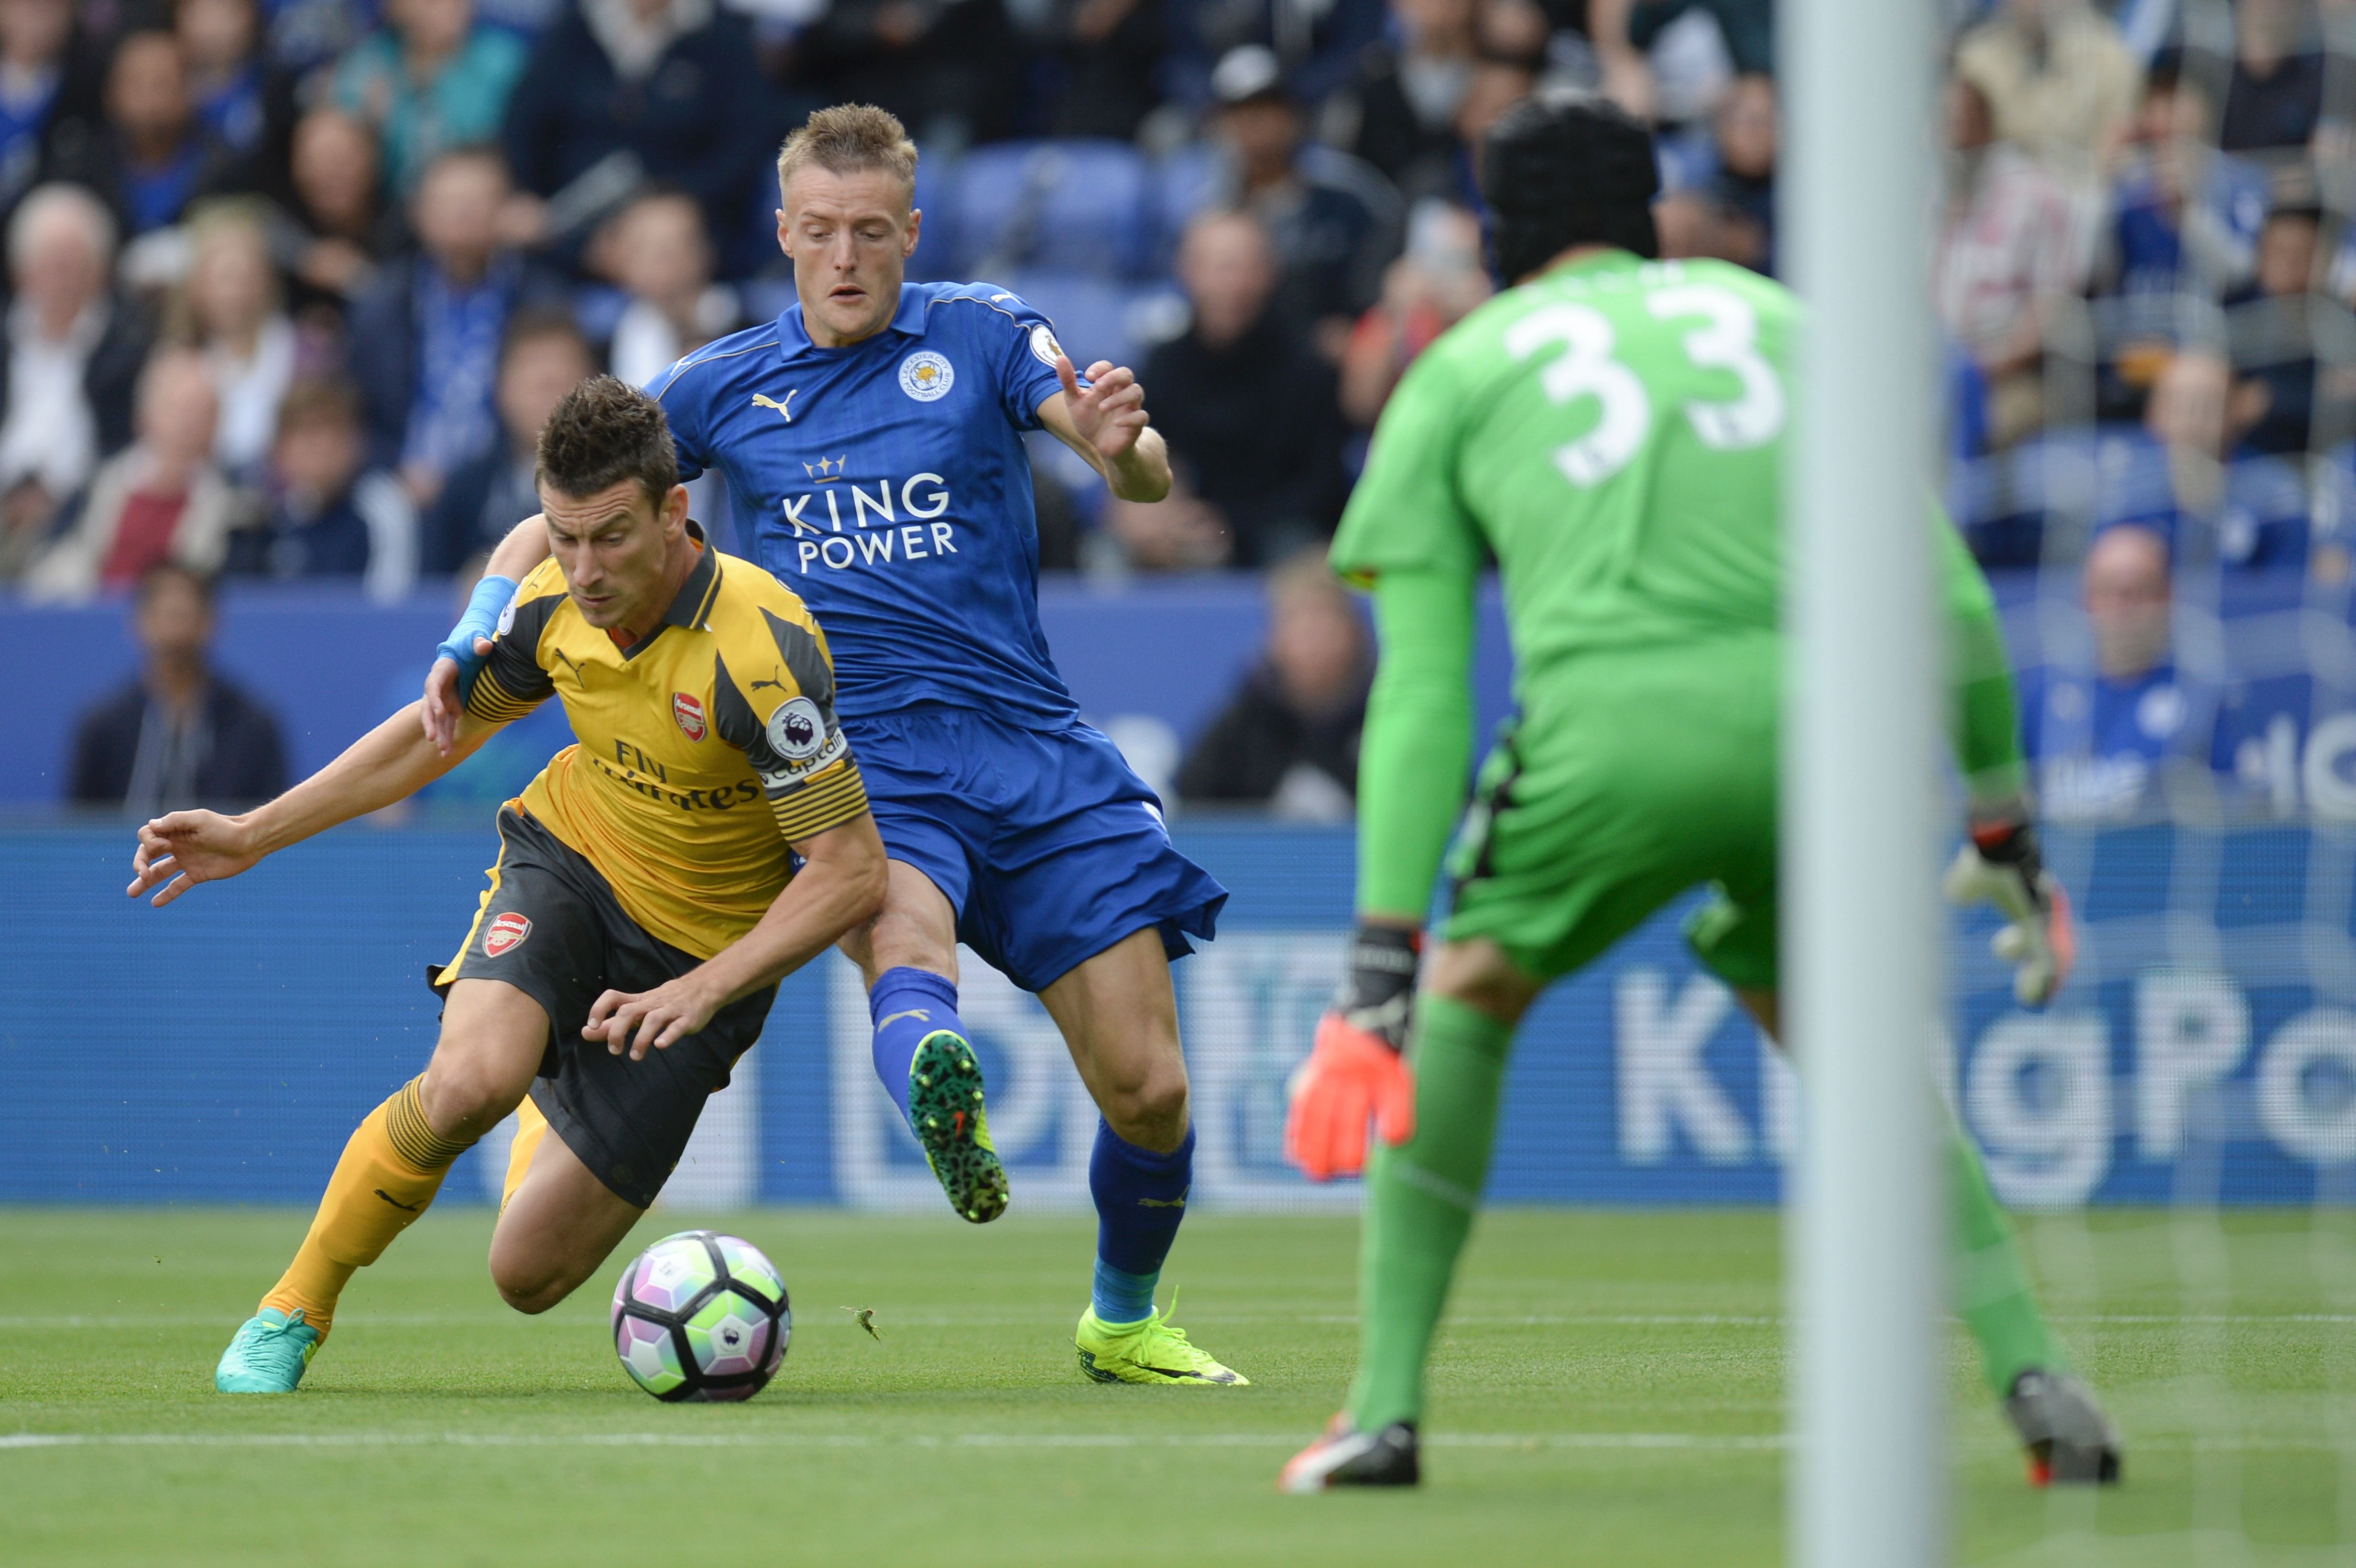 Arsenal's French defender Laurent Koscielny (L) tackles Leicester City's English striker Jamie Vardy (C) in the area during the English Premier League football match between Leicester City and Arsenal at King Power Stadium in Leicester, central England on August 20, 2016. / AFP / OLI SCARFF / RESTRICTED TO EDITORIAL USE. No use with unauthorized audio, video, data, fixture lists, club/league logos or 'live' services. Online in-match use limited to 75 images, no video emulation. No use in betting, games or single club/league/player publications.  /         (Photo credit should read OLI SCARFF/AFP/Getty Images)